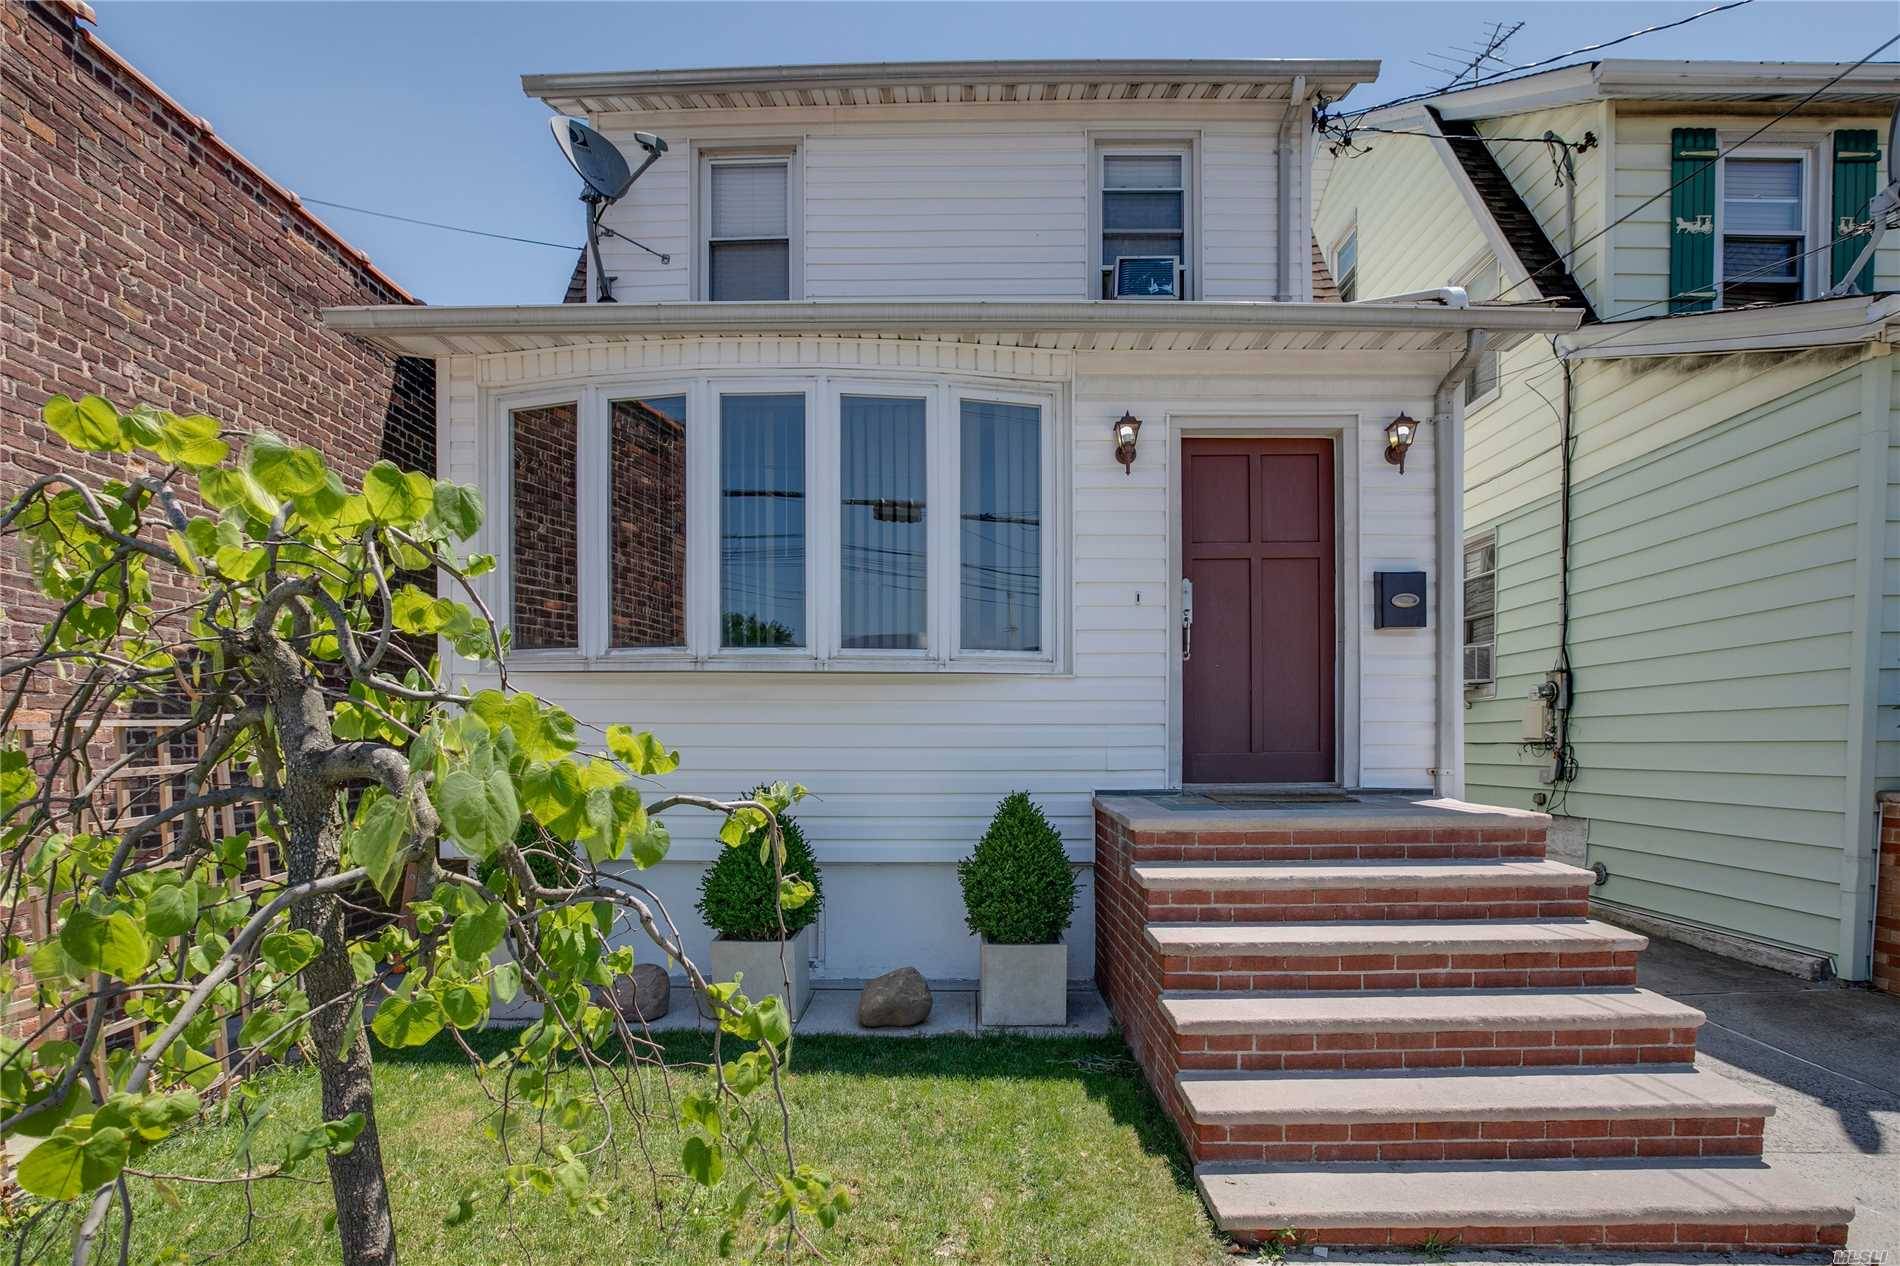 Lovely Single Family Home In Whitestone With 3 Bedrooms, 2 Full Bathrooms And Finished Basement.